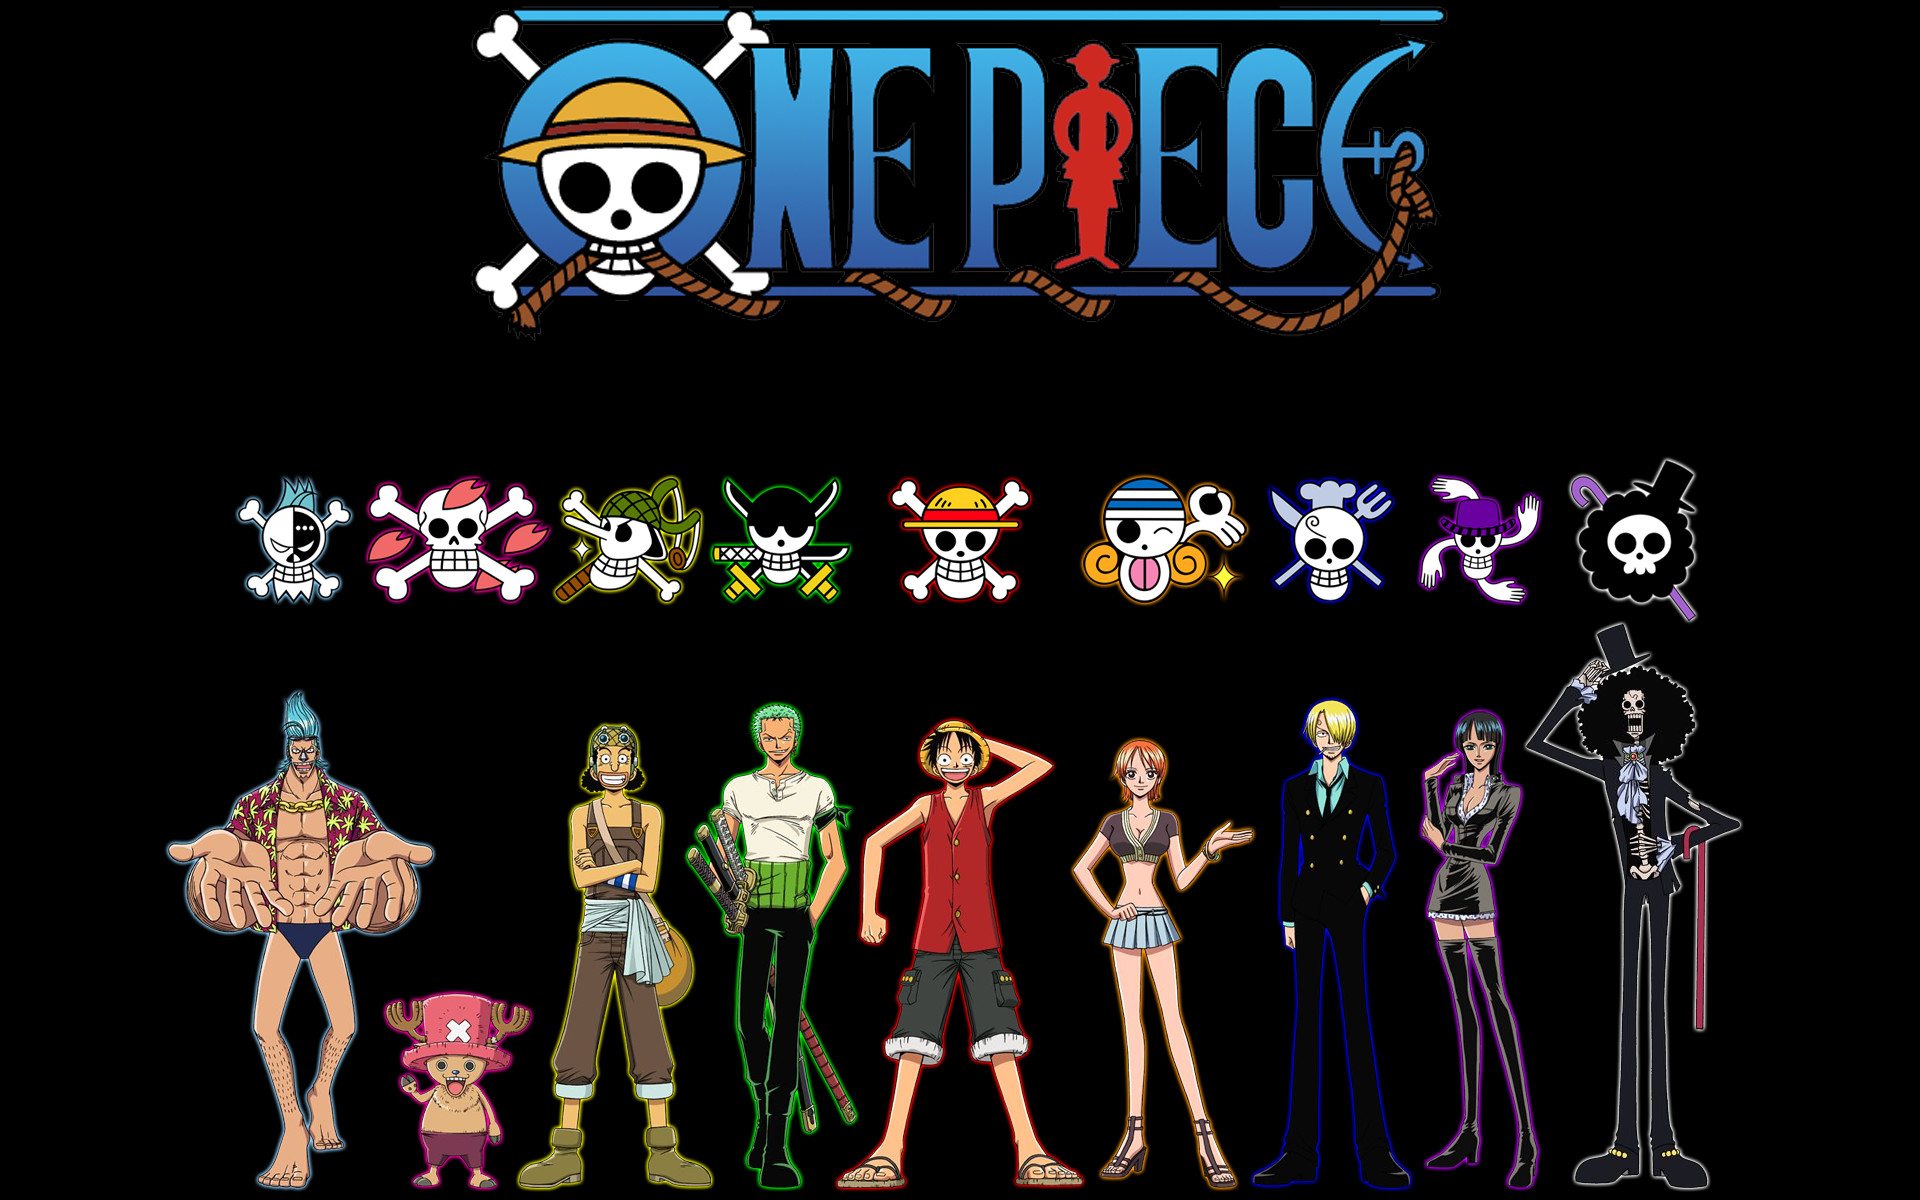 76 HD One Piece Wallpaper Backgrounds For Download